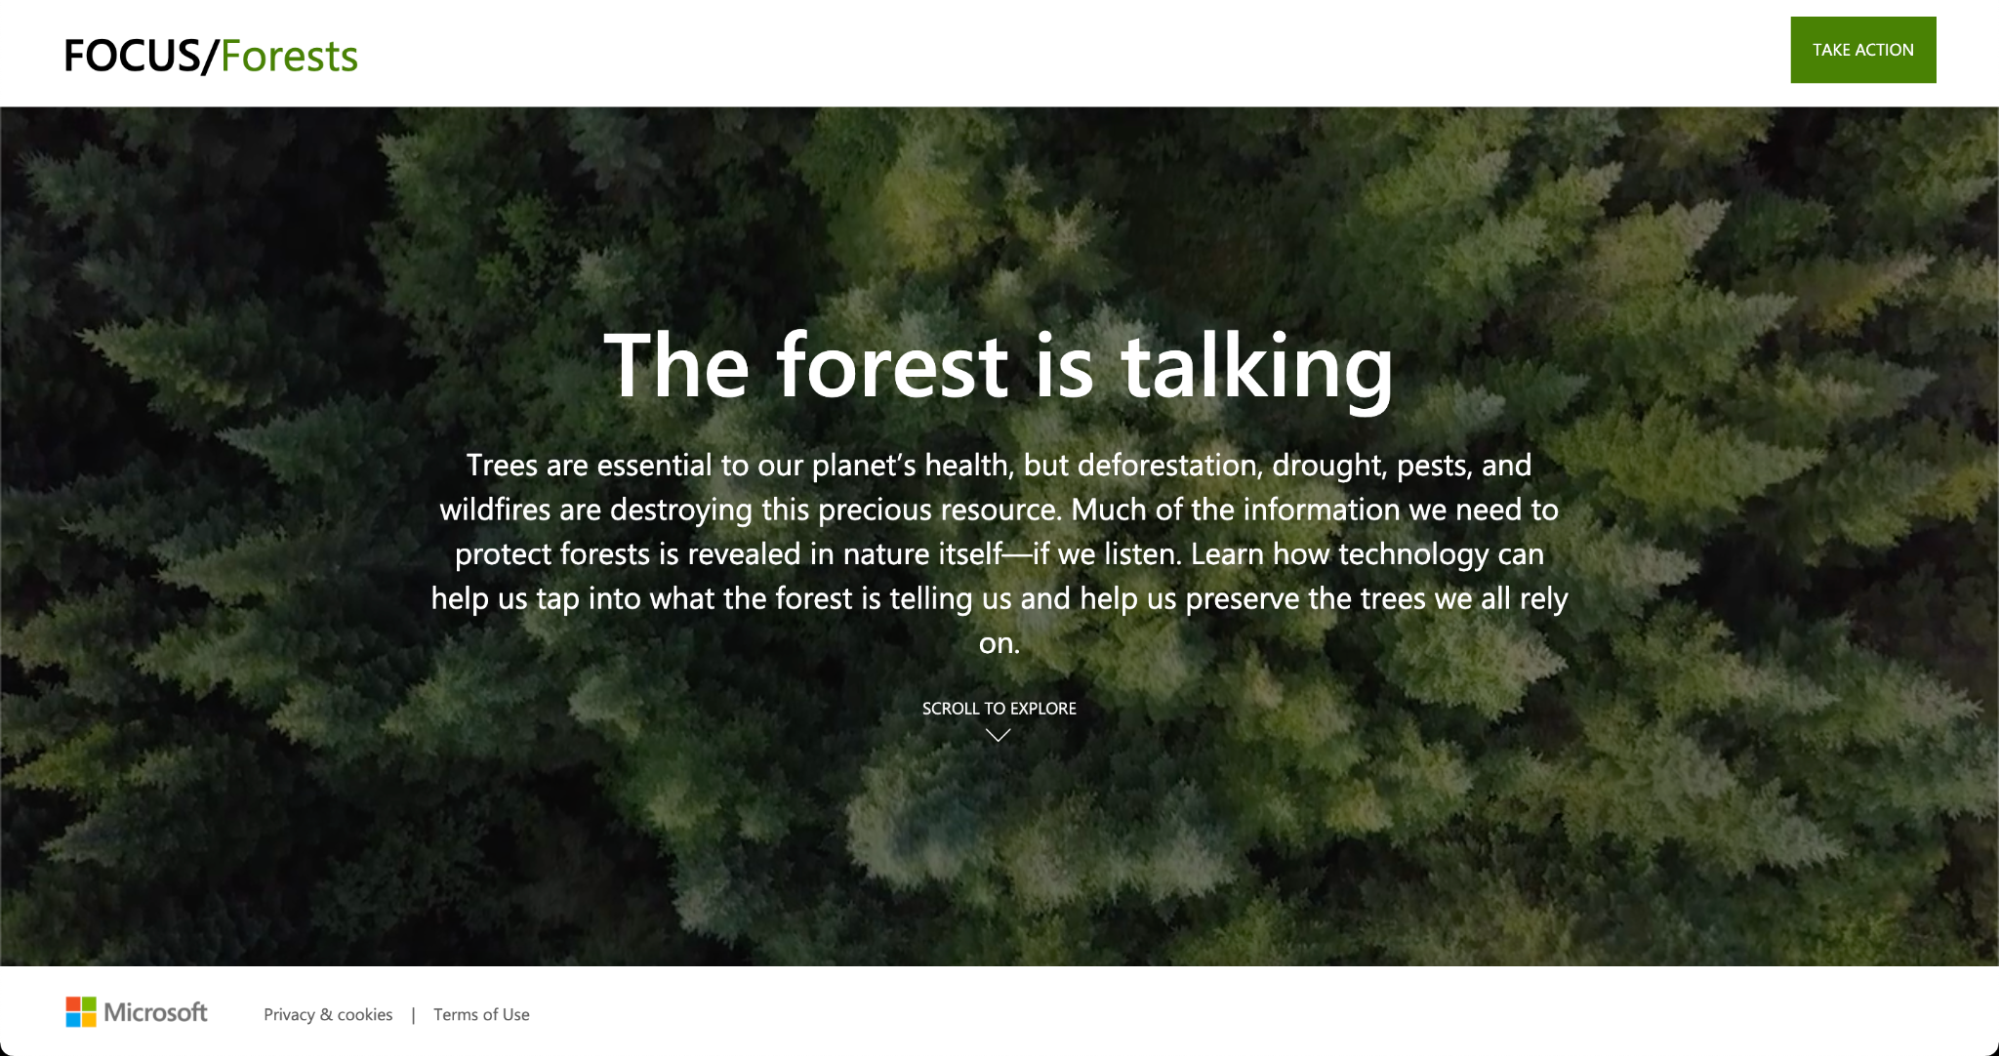 Microsoft: Focus/Forests